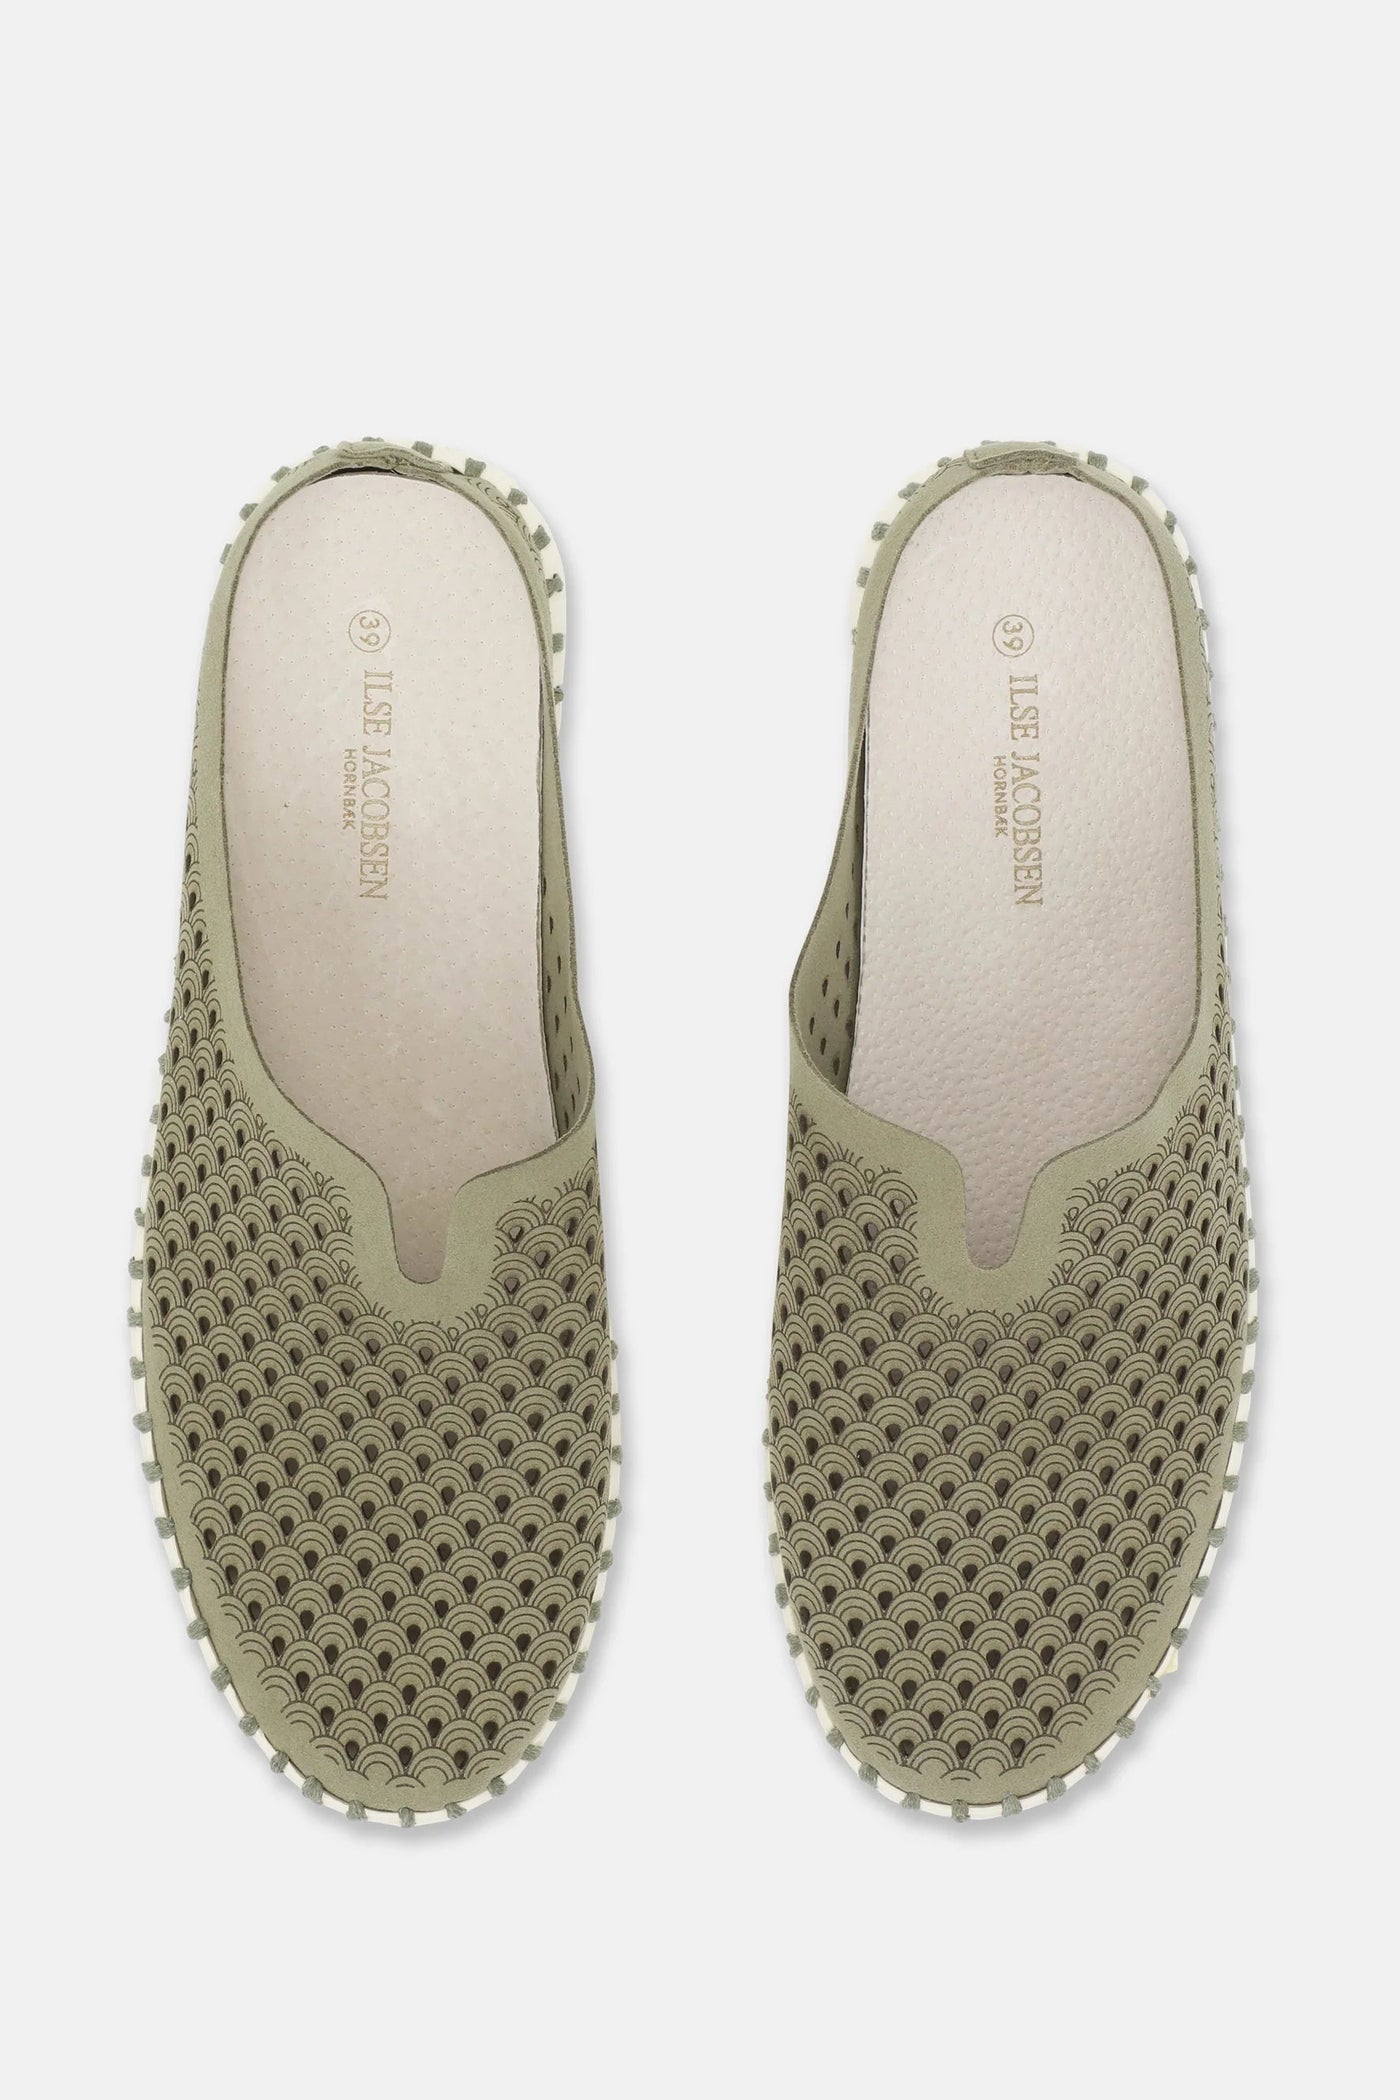 Ilse Jacobsen Tulip Slip On Shoes in Army-Womens-Ohh! By Gum - Shop Sustainable